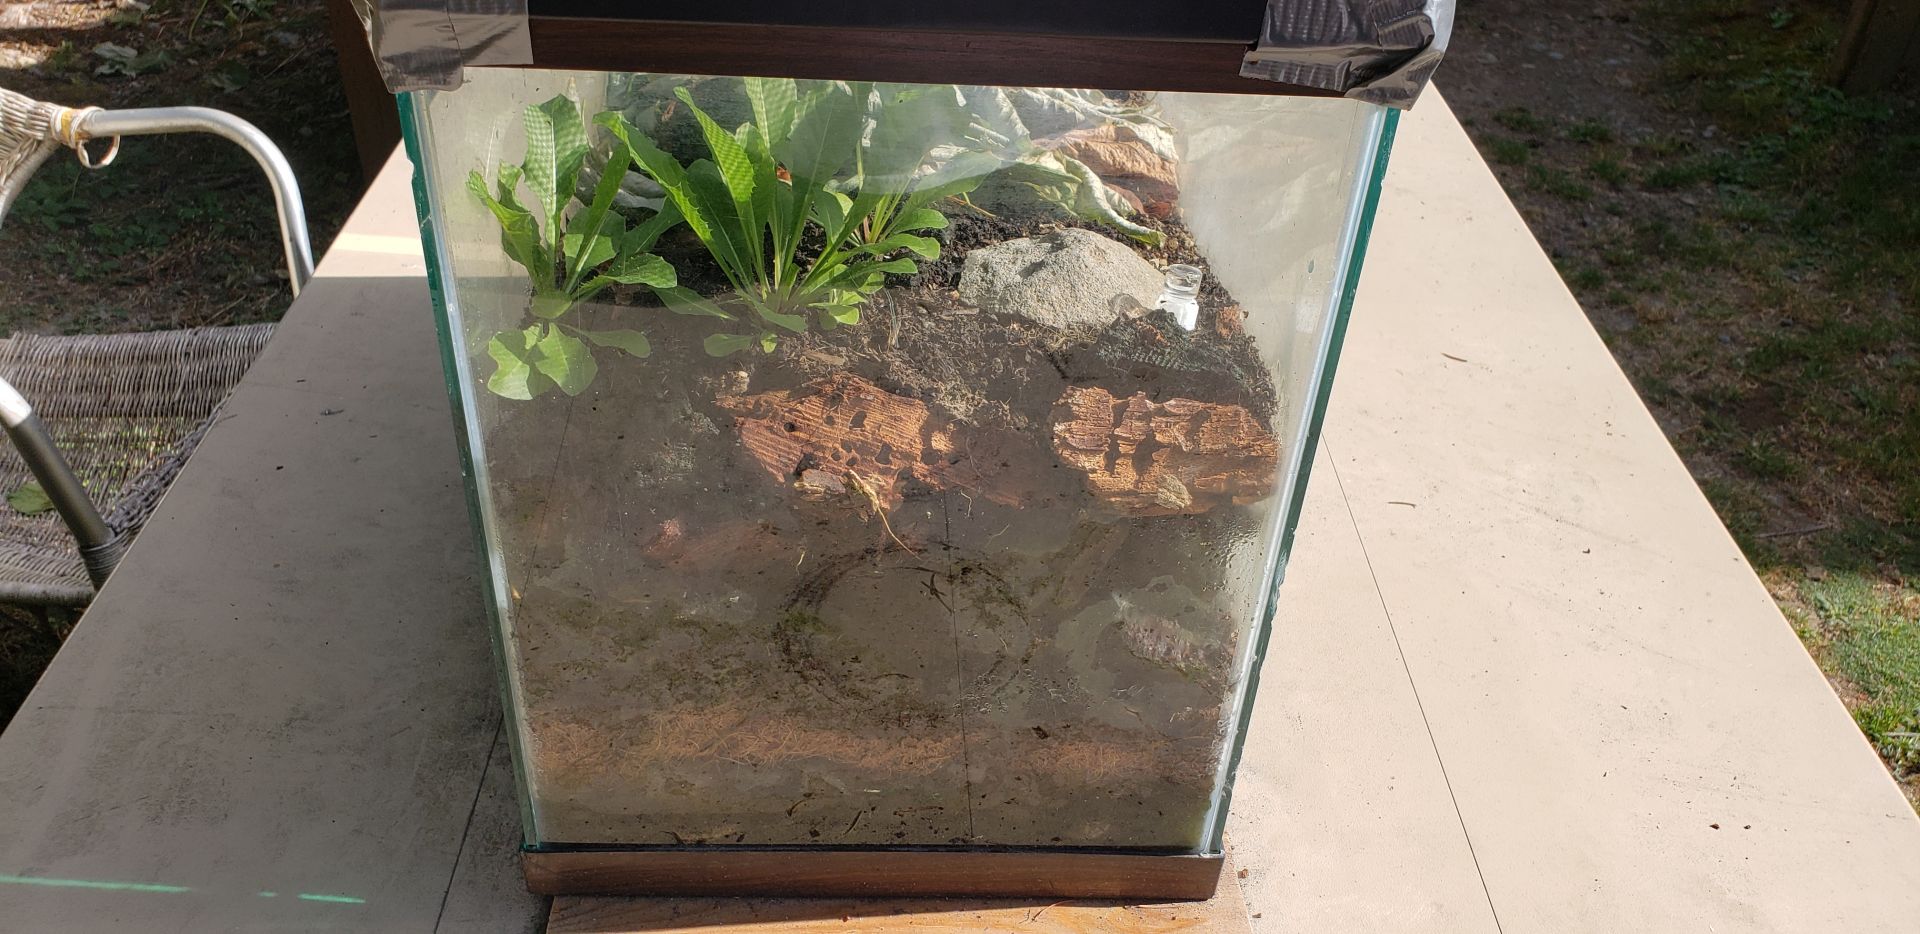 Other side of the Terrarium